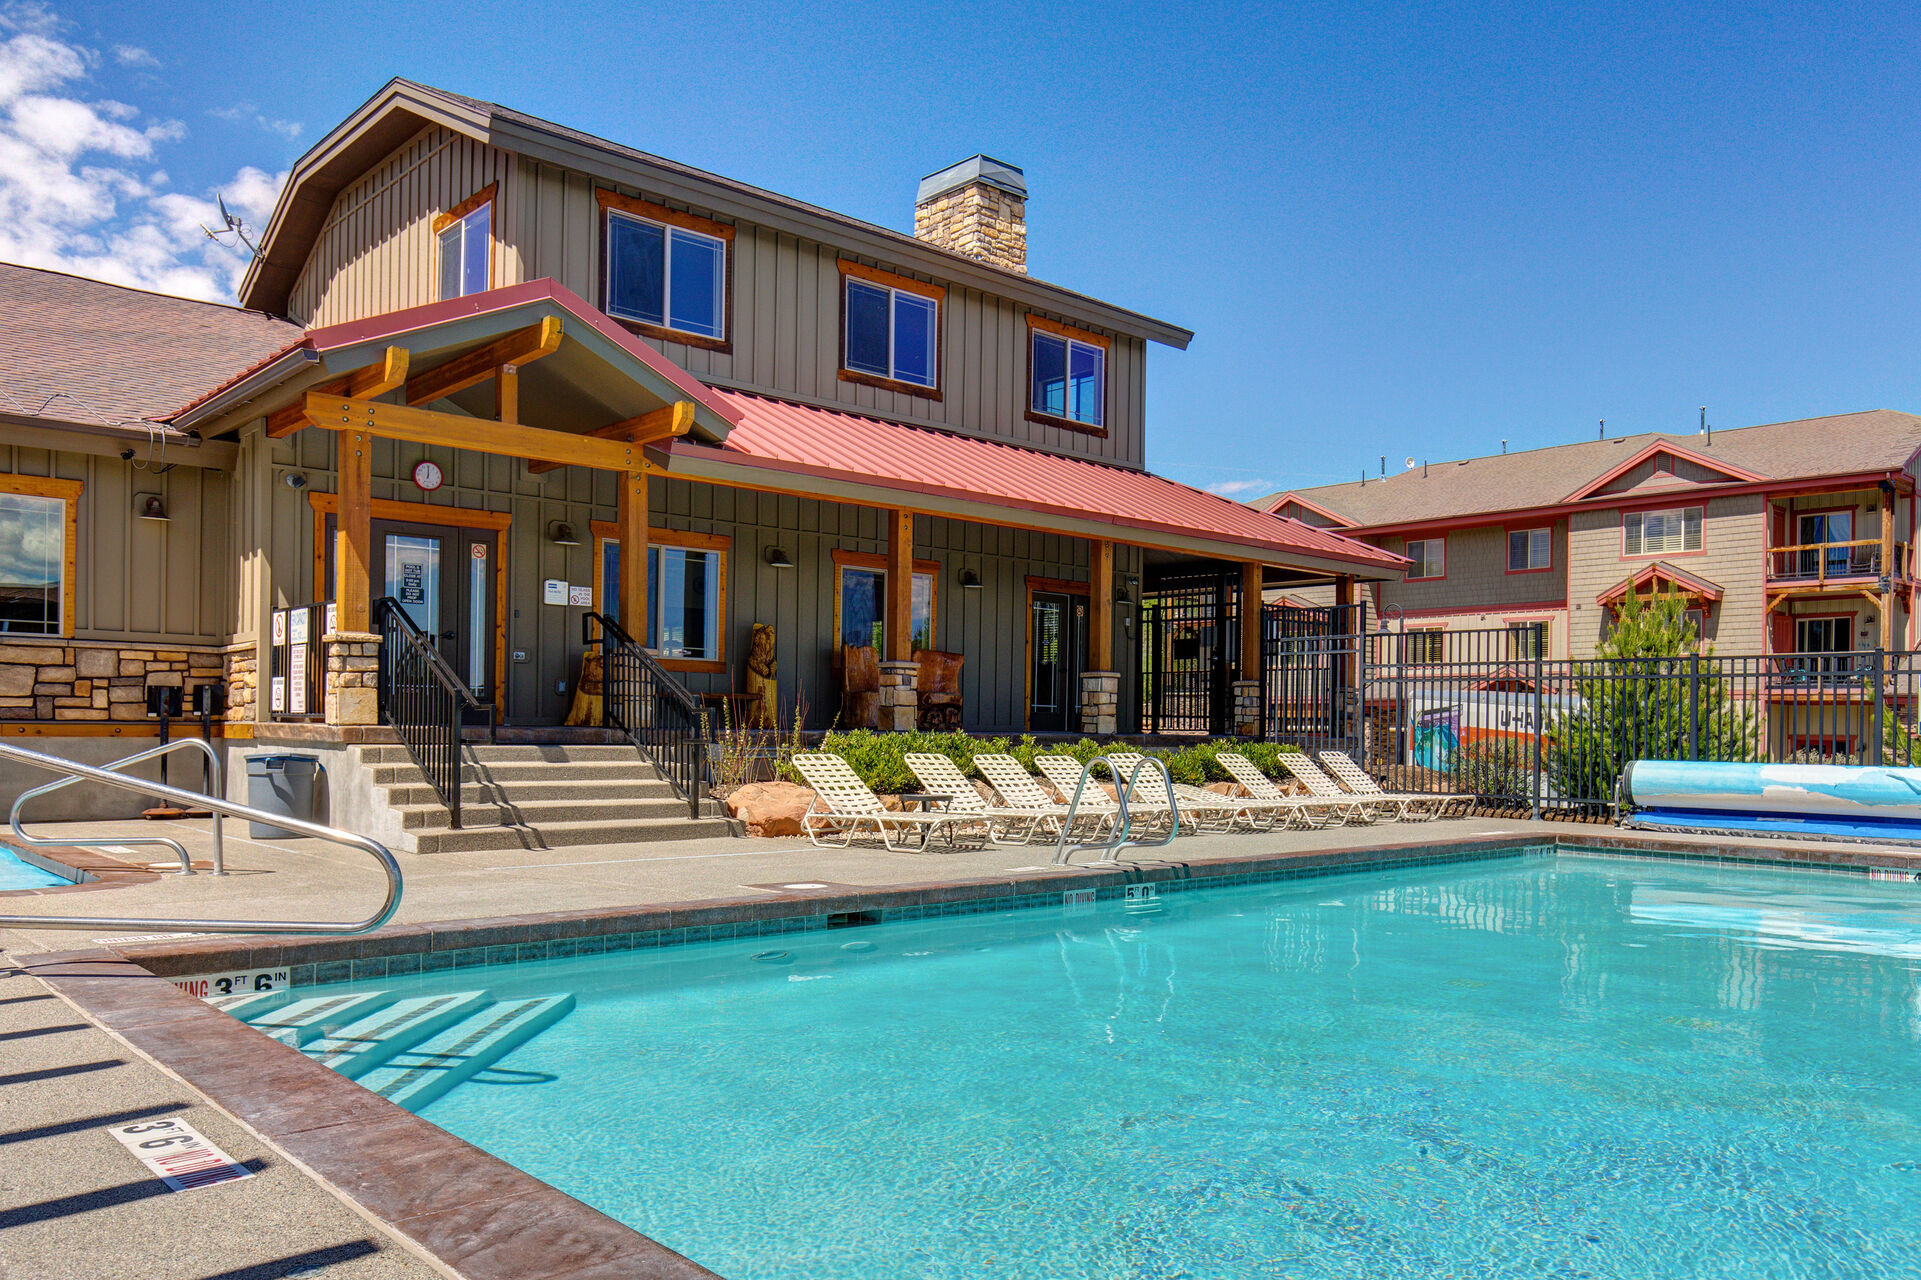 Bear Hollow Clubhouse located across the street with seasonal pool, hot tub, and fitness center